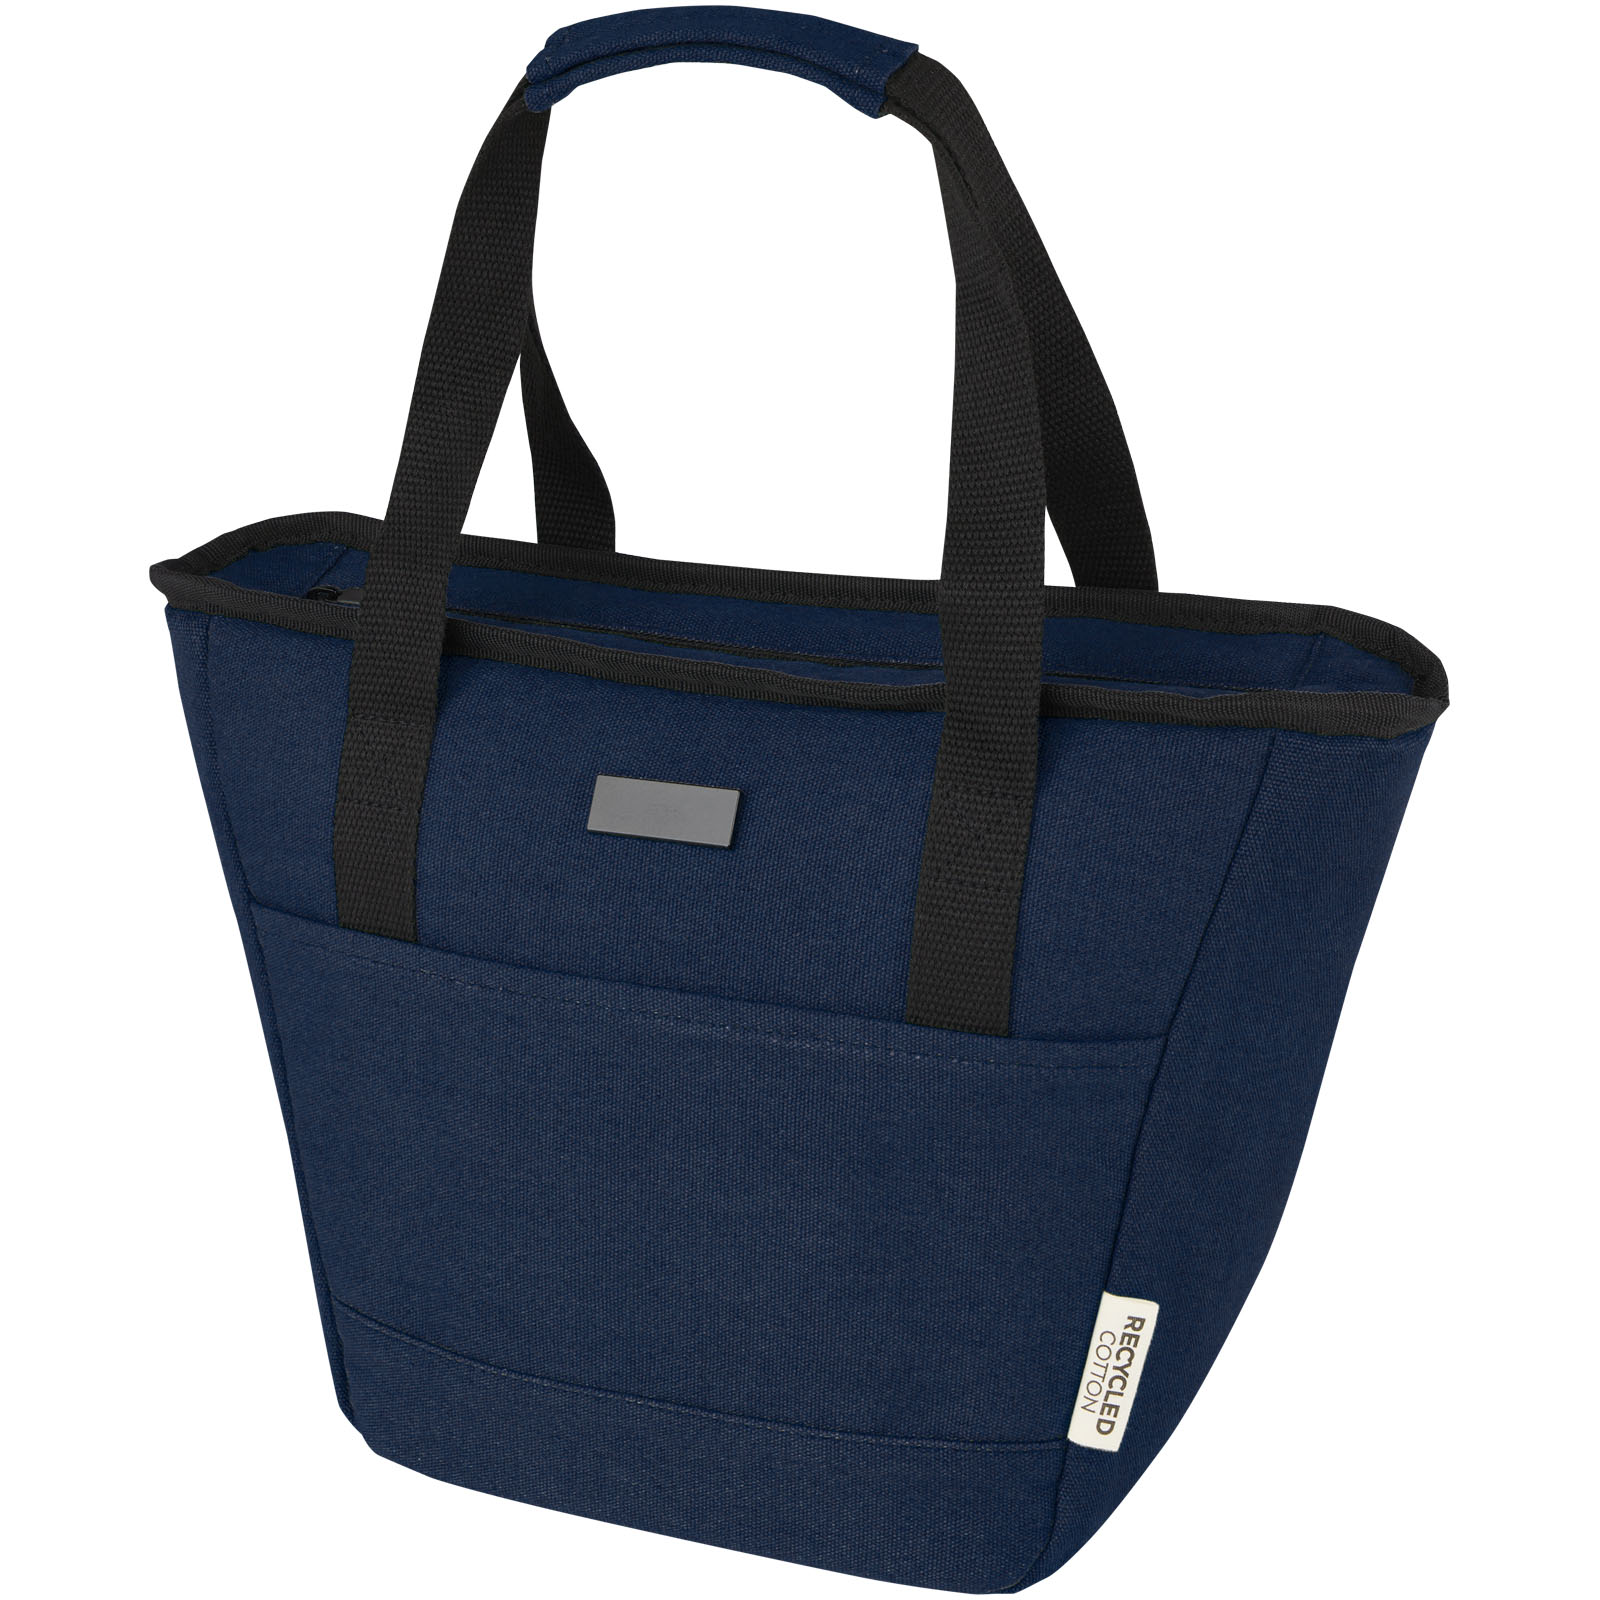 Joey 6L lunch cooler bag made of GRS recycled canvas, capable of holding 9 cans - Altcar